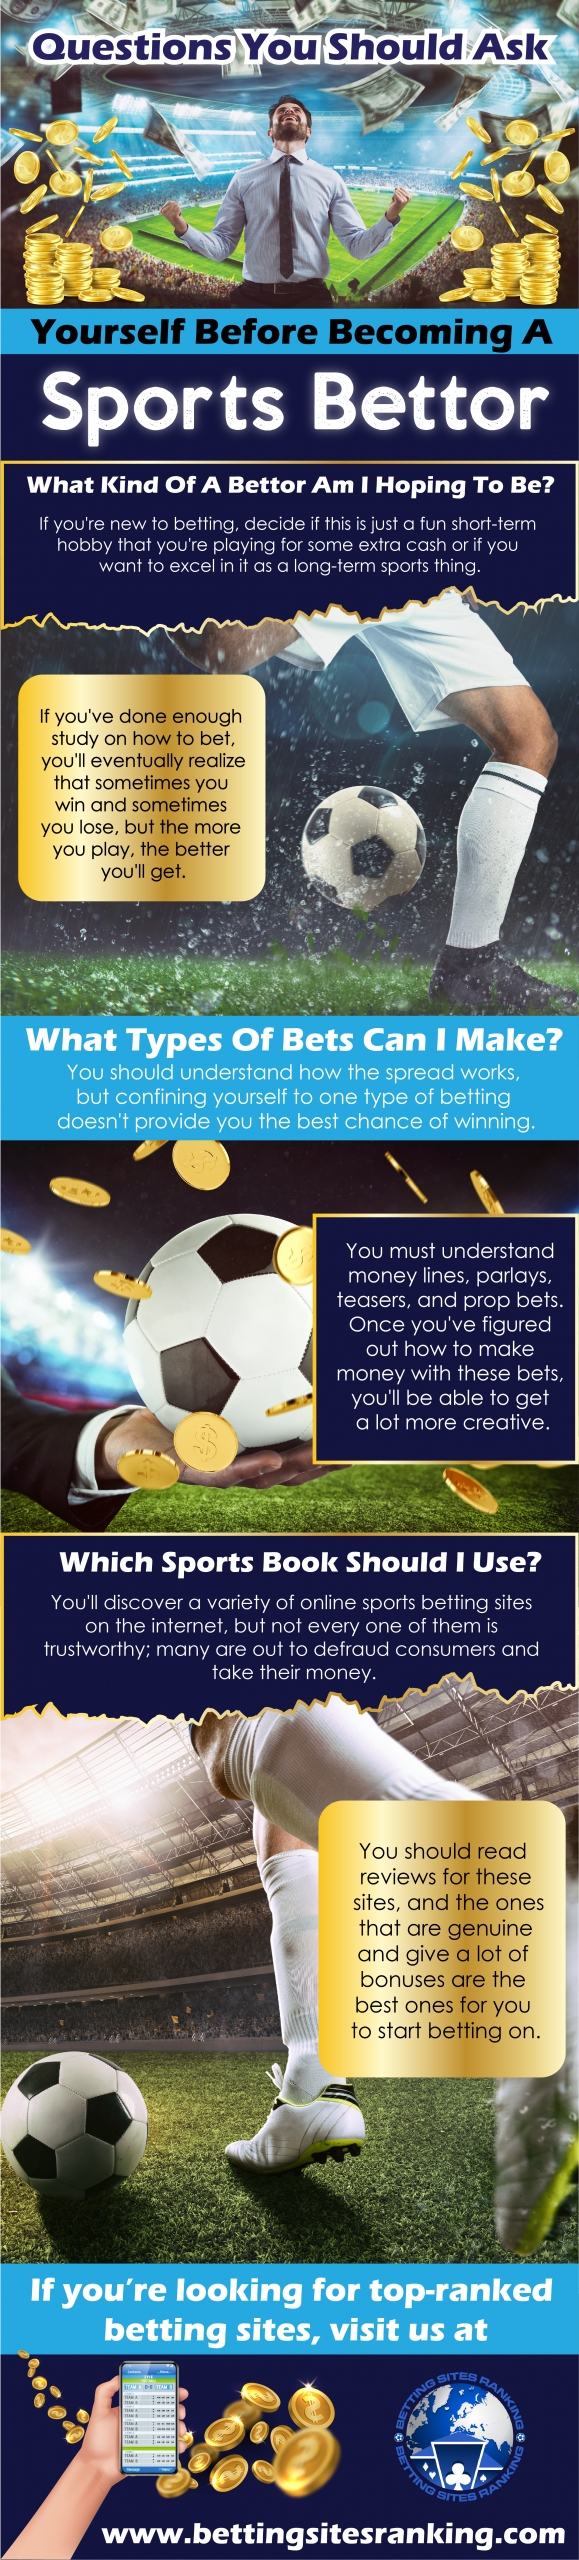 Questions-You-Should-Ask-Yourself-Before-Becoming-A-Sports-Bettor